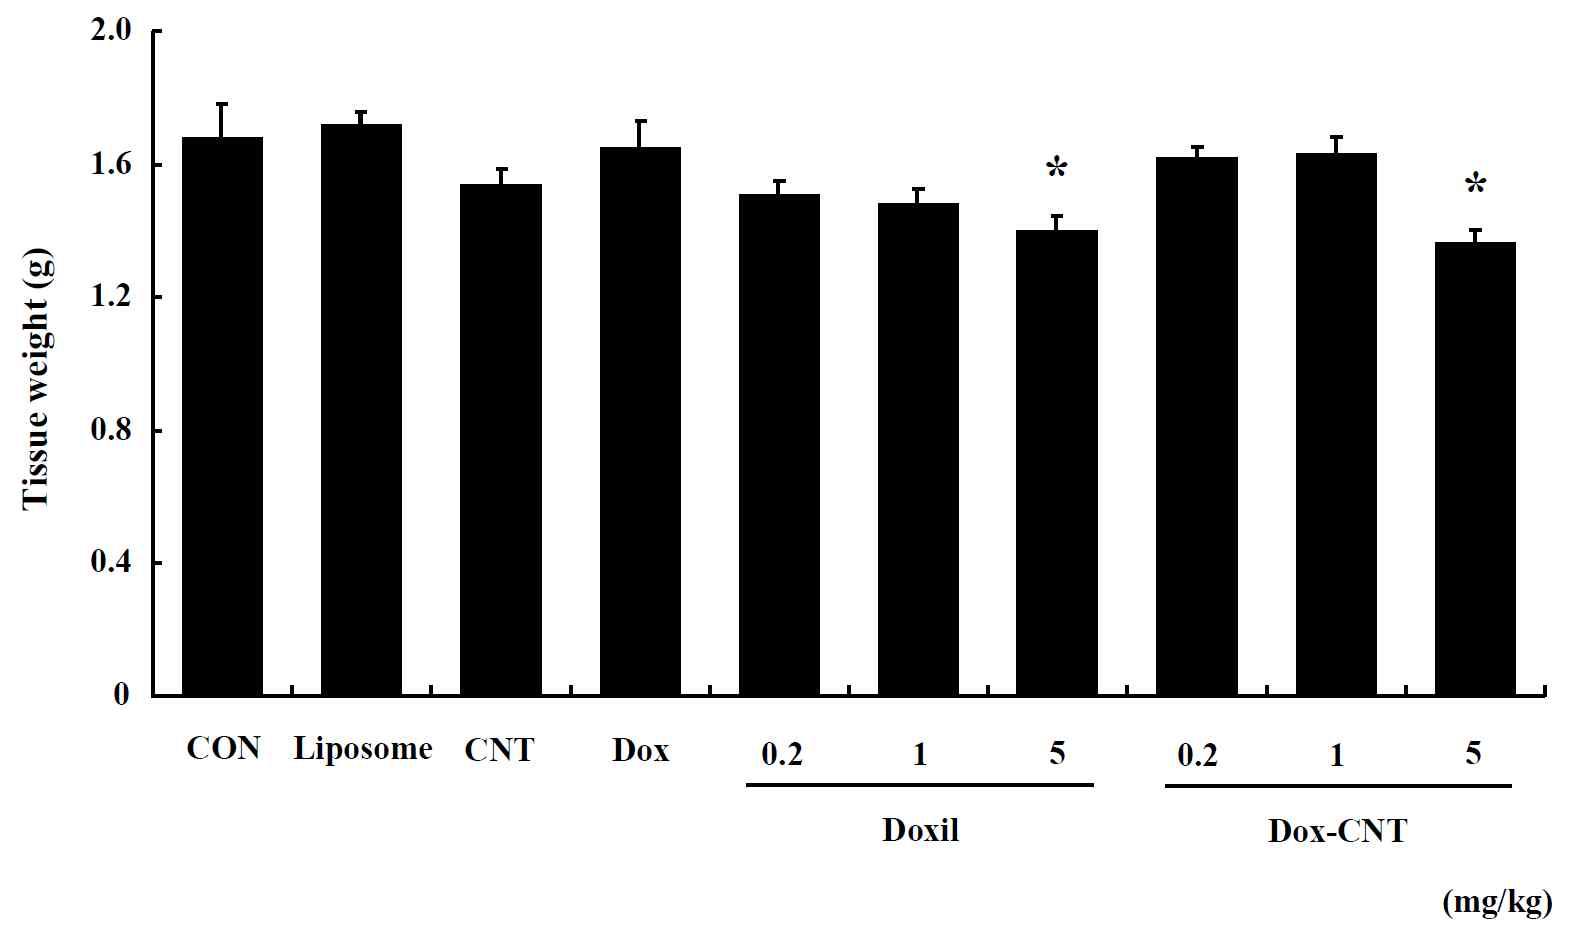 The change of liver weight in single exposed male ICR mice for 14 days. Mice were respectively administered by intravenous injection with liposome, CNT, Dox, Doxil (0.2, 1, 5 mg/kg) and Dox-CNT (0.2, 1, 5 mg/kg). The results are presented as mean ± SE (n = 10). * p < 0.05, significantly different from the control.